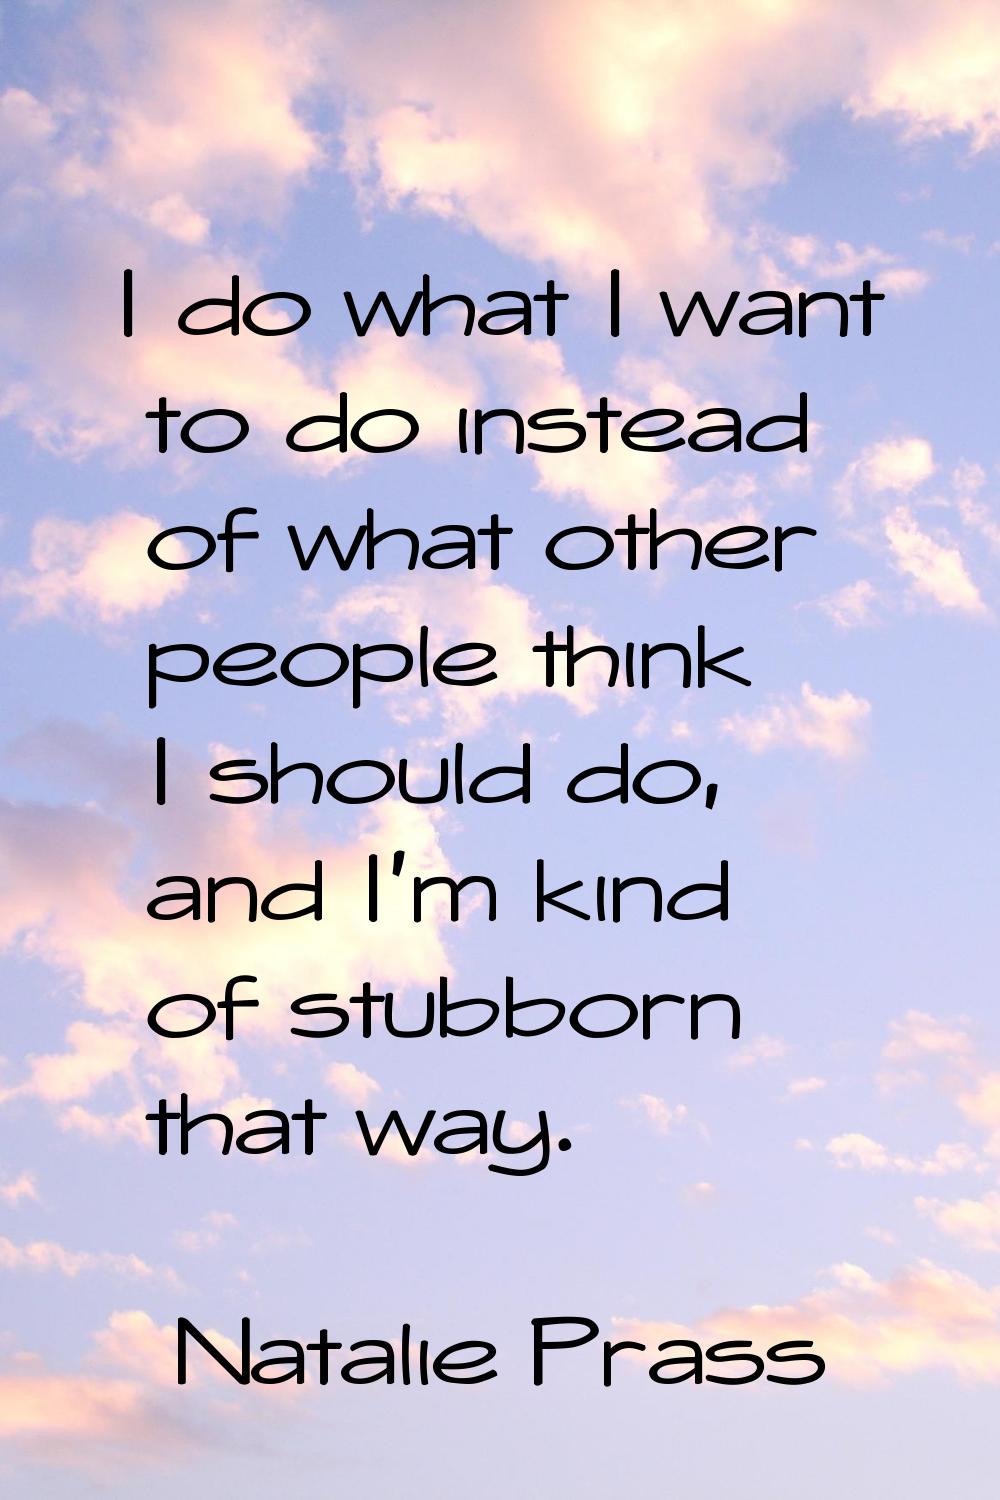 I do what I want to do instead of what other people think I should do, and I'm kind of stubborn tha